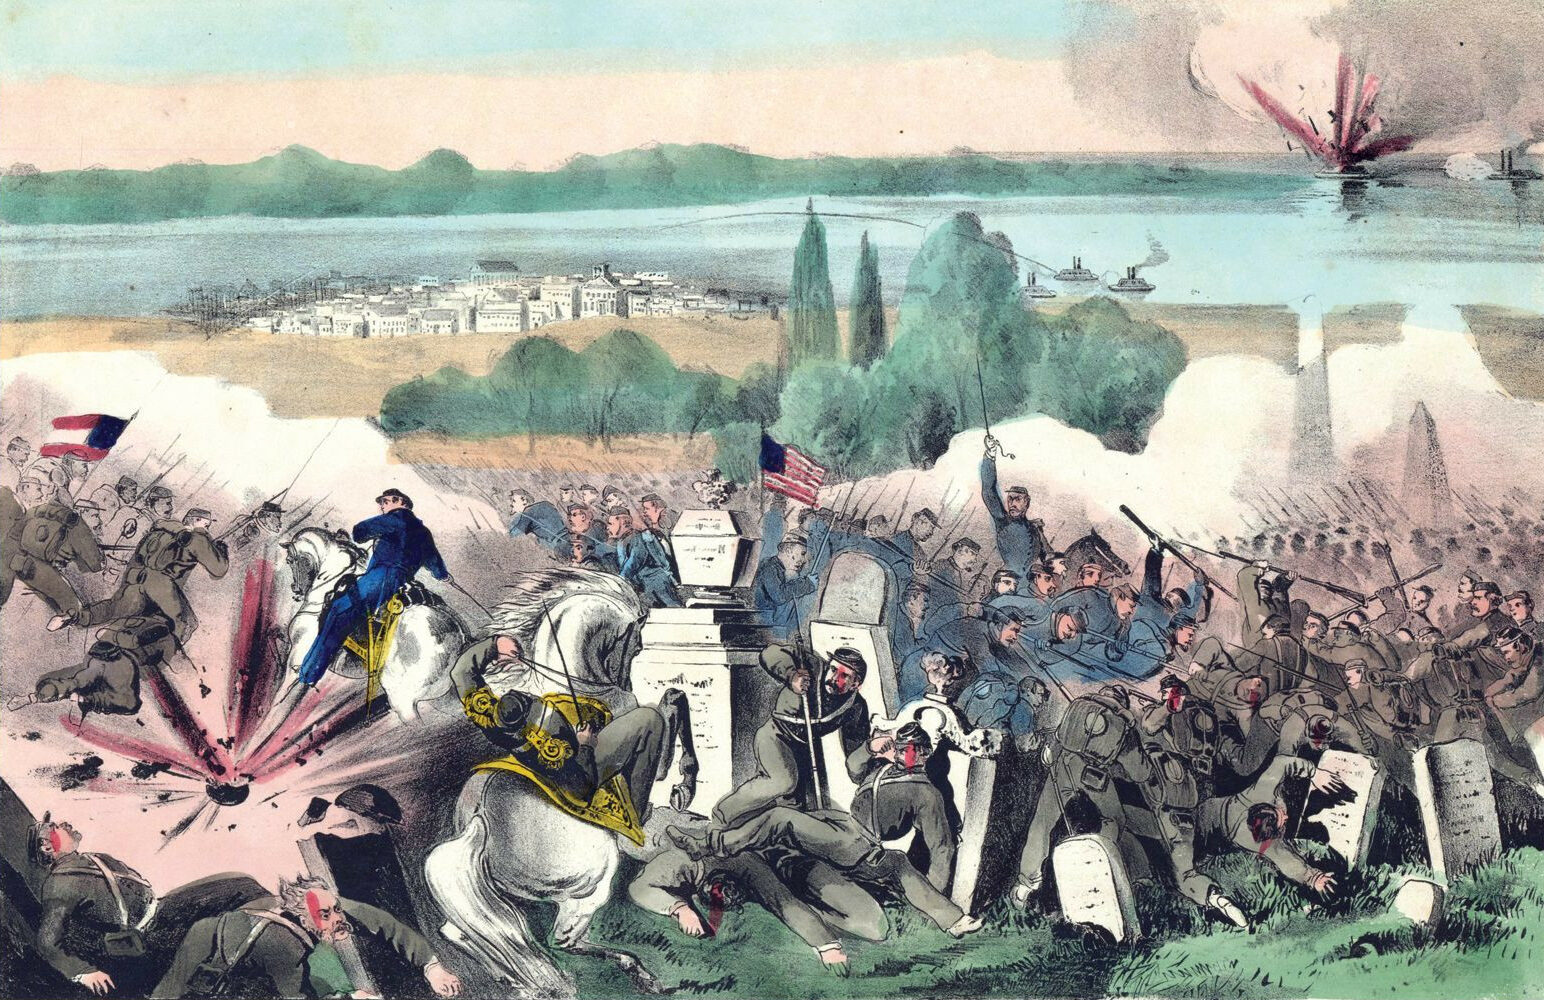 Union and Confederate troops battle among the tombstones in a Baton Rouge cemetery during a failed attempt by Rebel forces to retake the city in the summer of 1862.